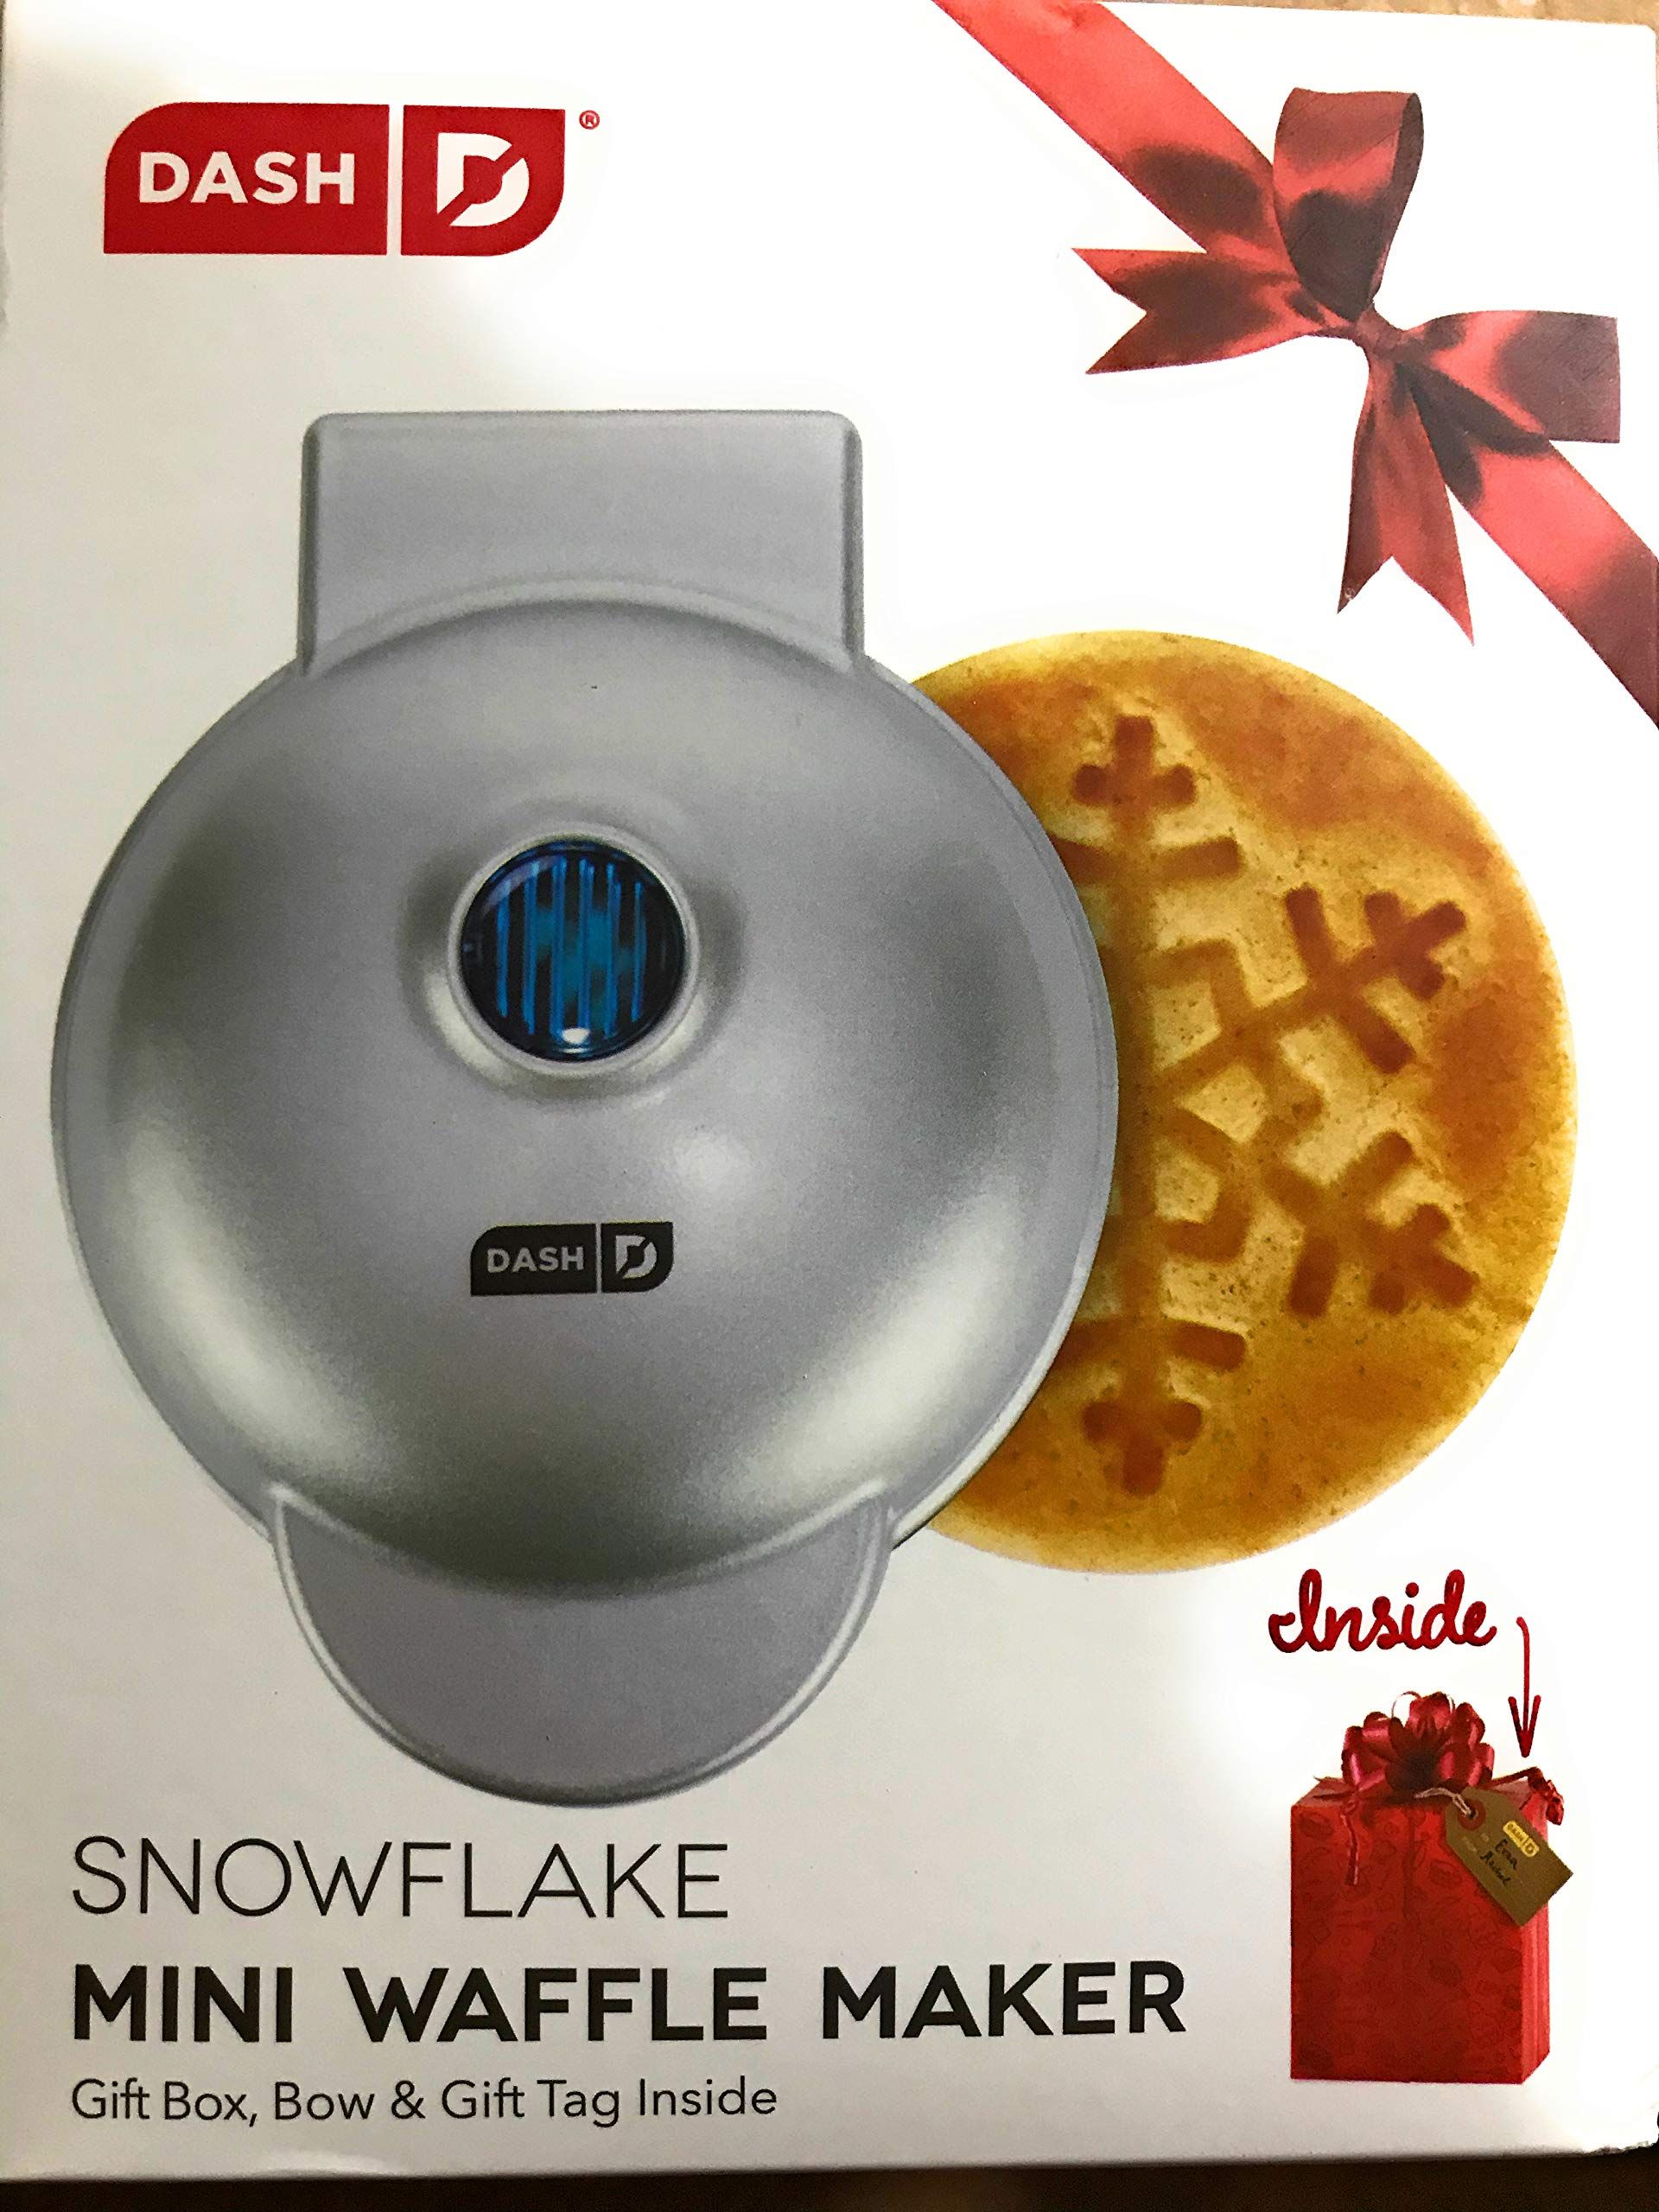 Dash Snowflake Mini Waffle Maker (Silver) with Gift Box, Bow & Gift Tag Inside | Amazon (US)